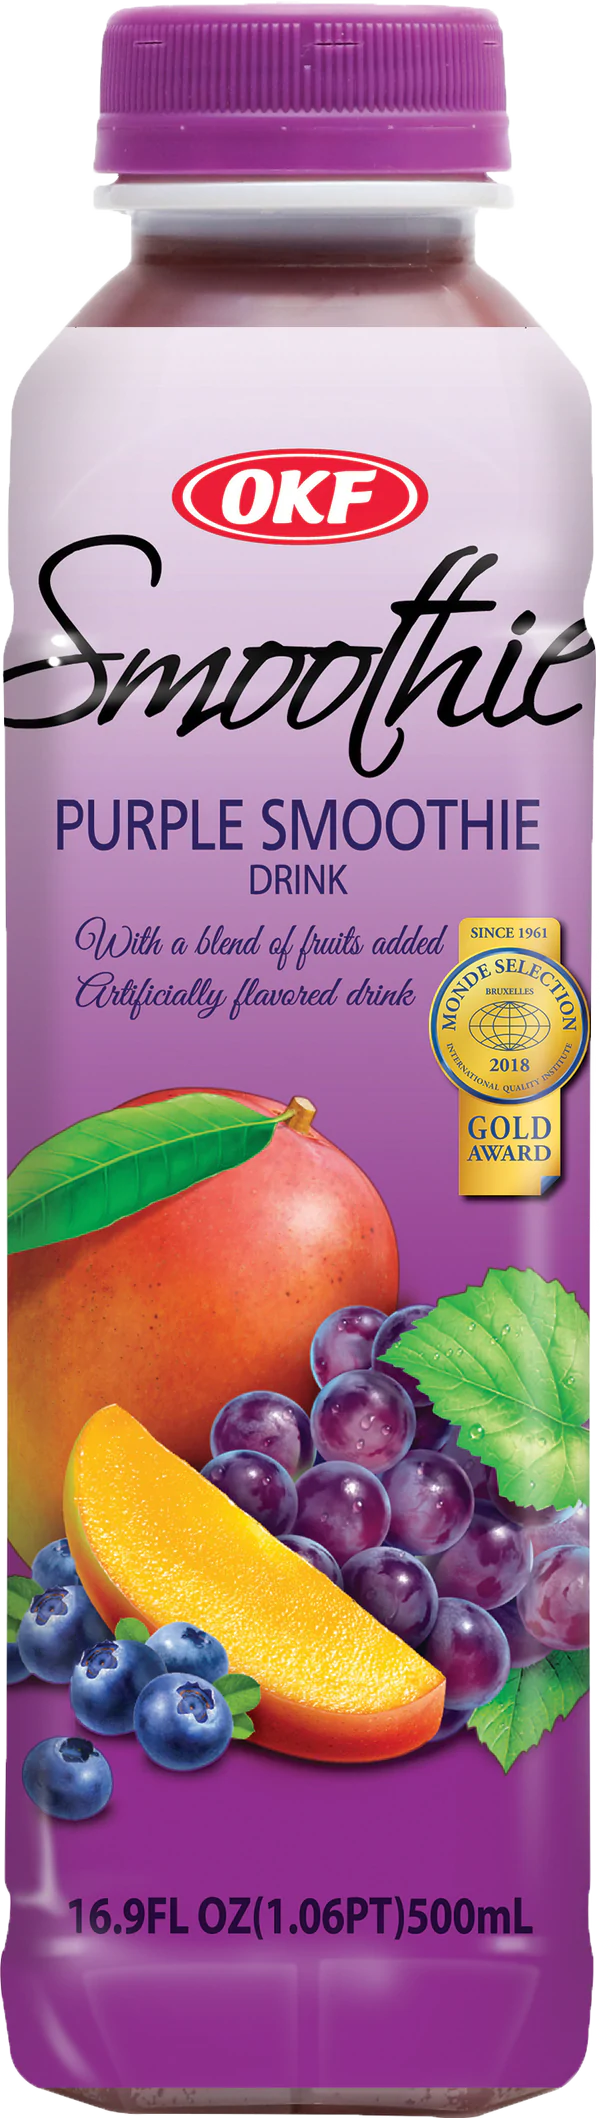 OKF Purple Smoothie Drink 500 ml Snaxies Exotic Drinks Montreal Canada